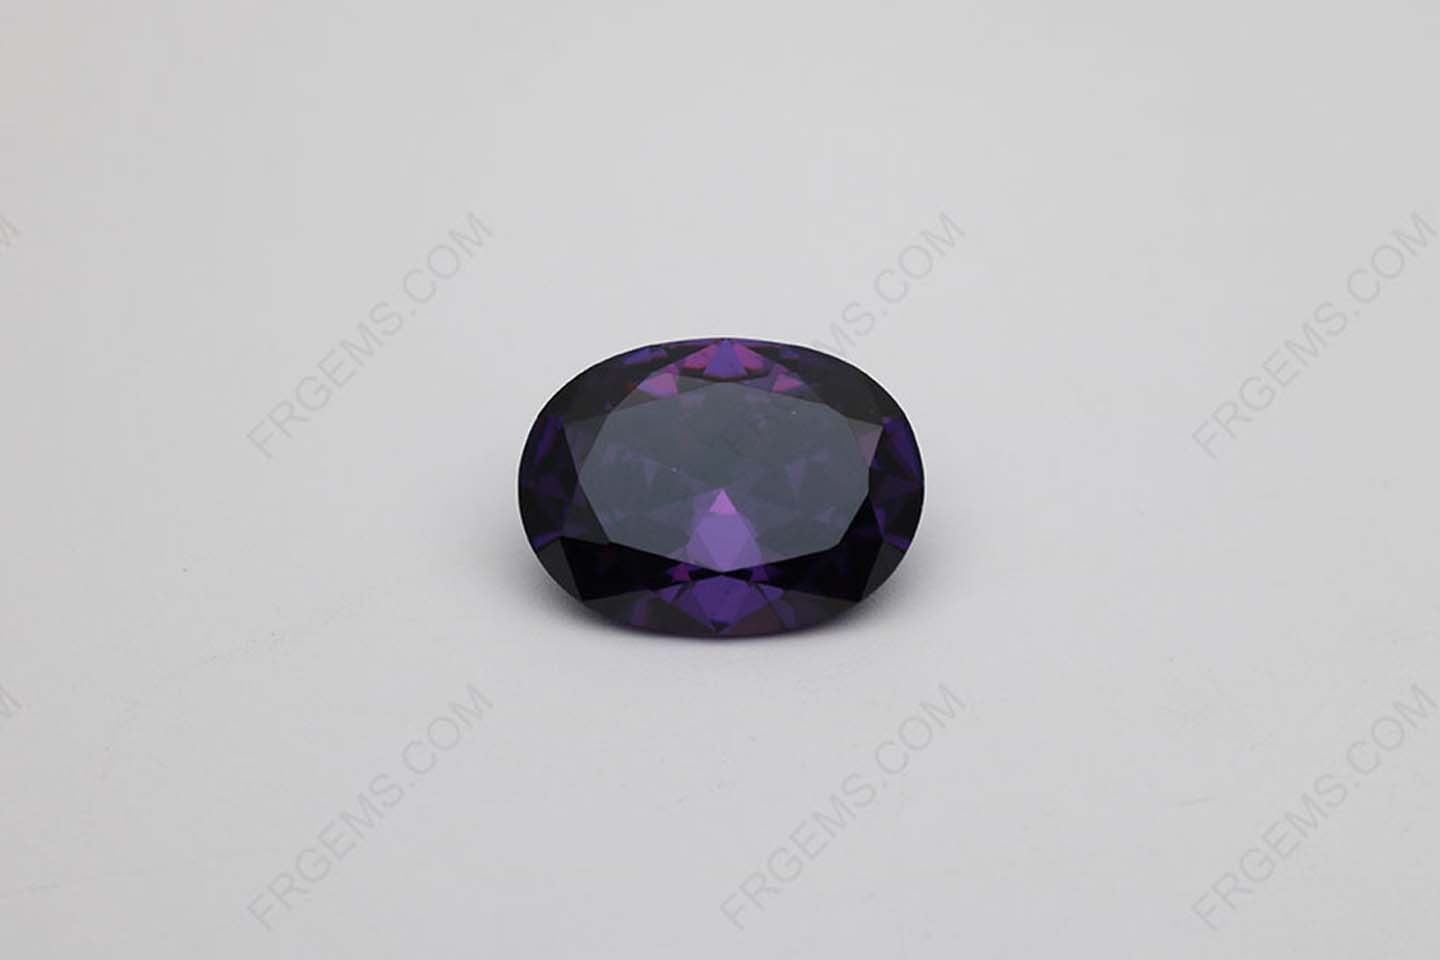 Cubic Zirconia Amethyst Color Oval Shape faceted cut 12x16mm stones CZ10 IMG_2362